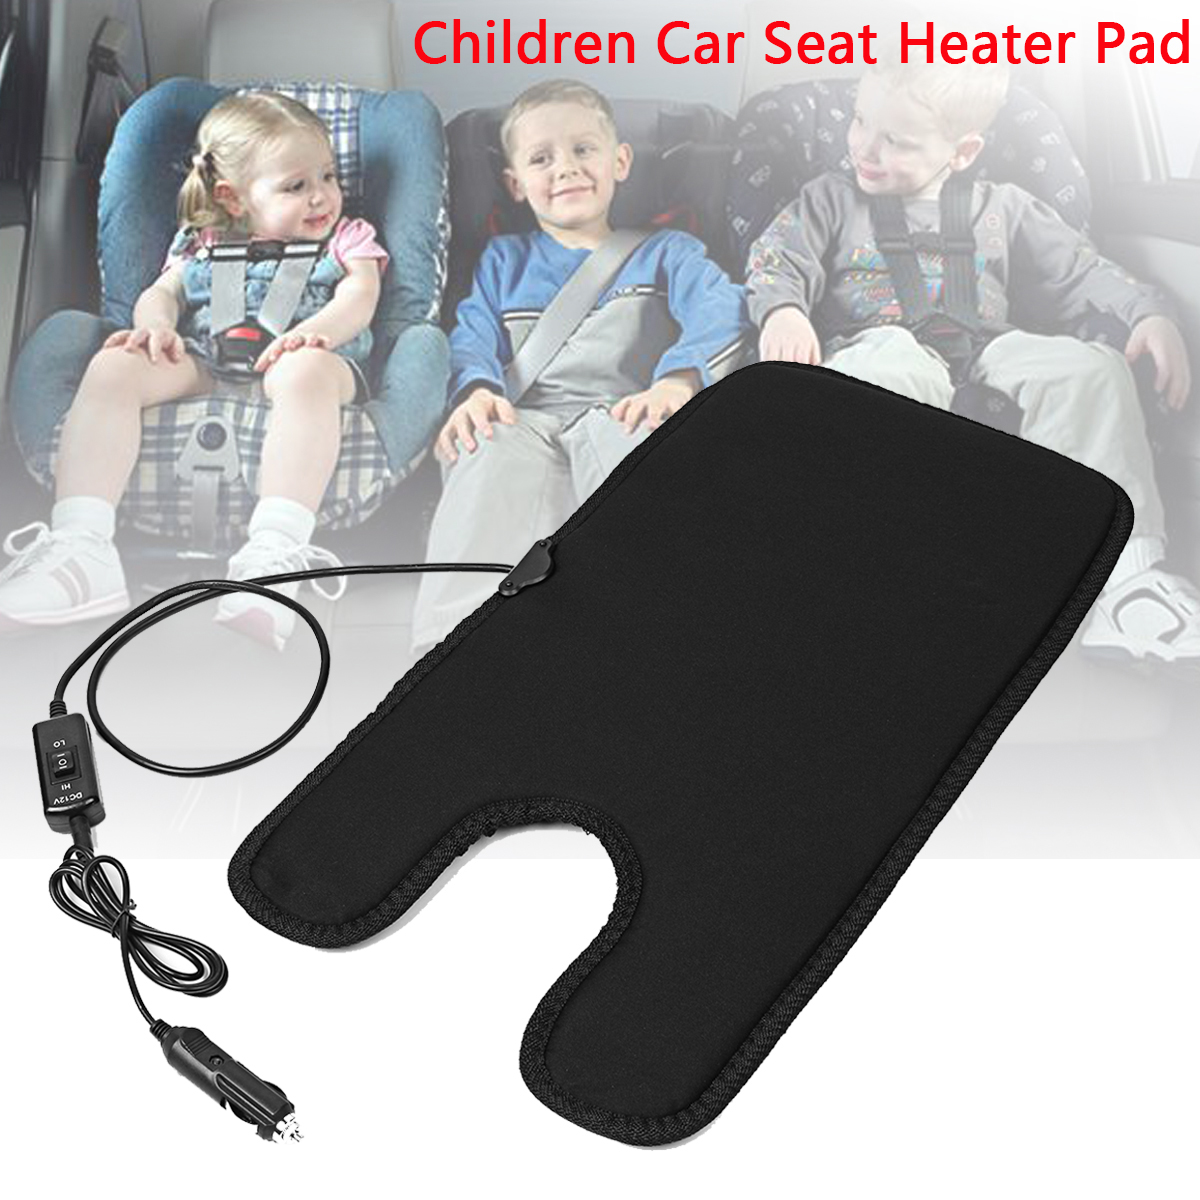 12V-50x27cm-Winter-Car-Baby-Auto-Seat-Electrical-Heating-Cover-Seat-Heater-Pad-with-Lighter-and-Swit-1652730-1